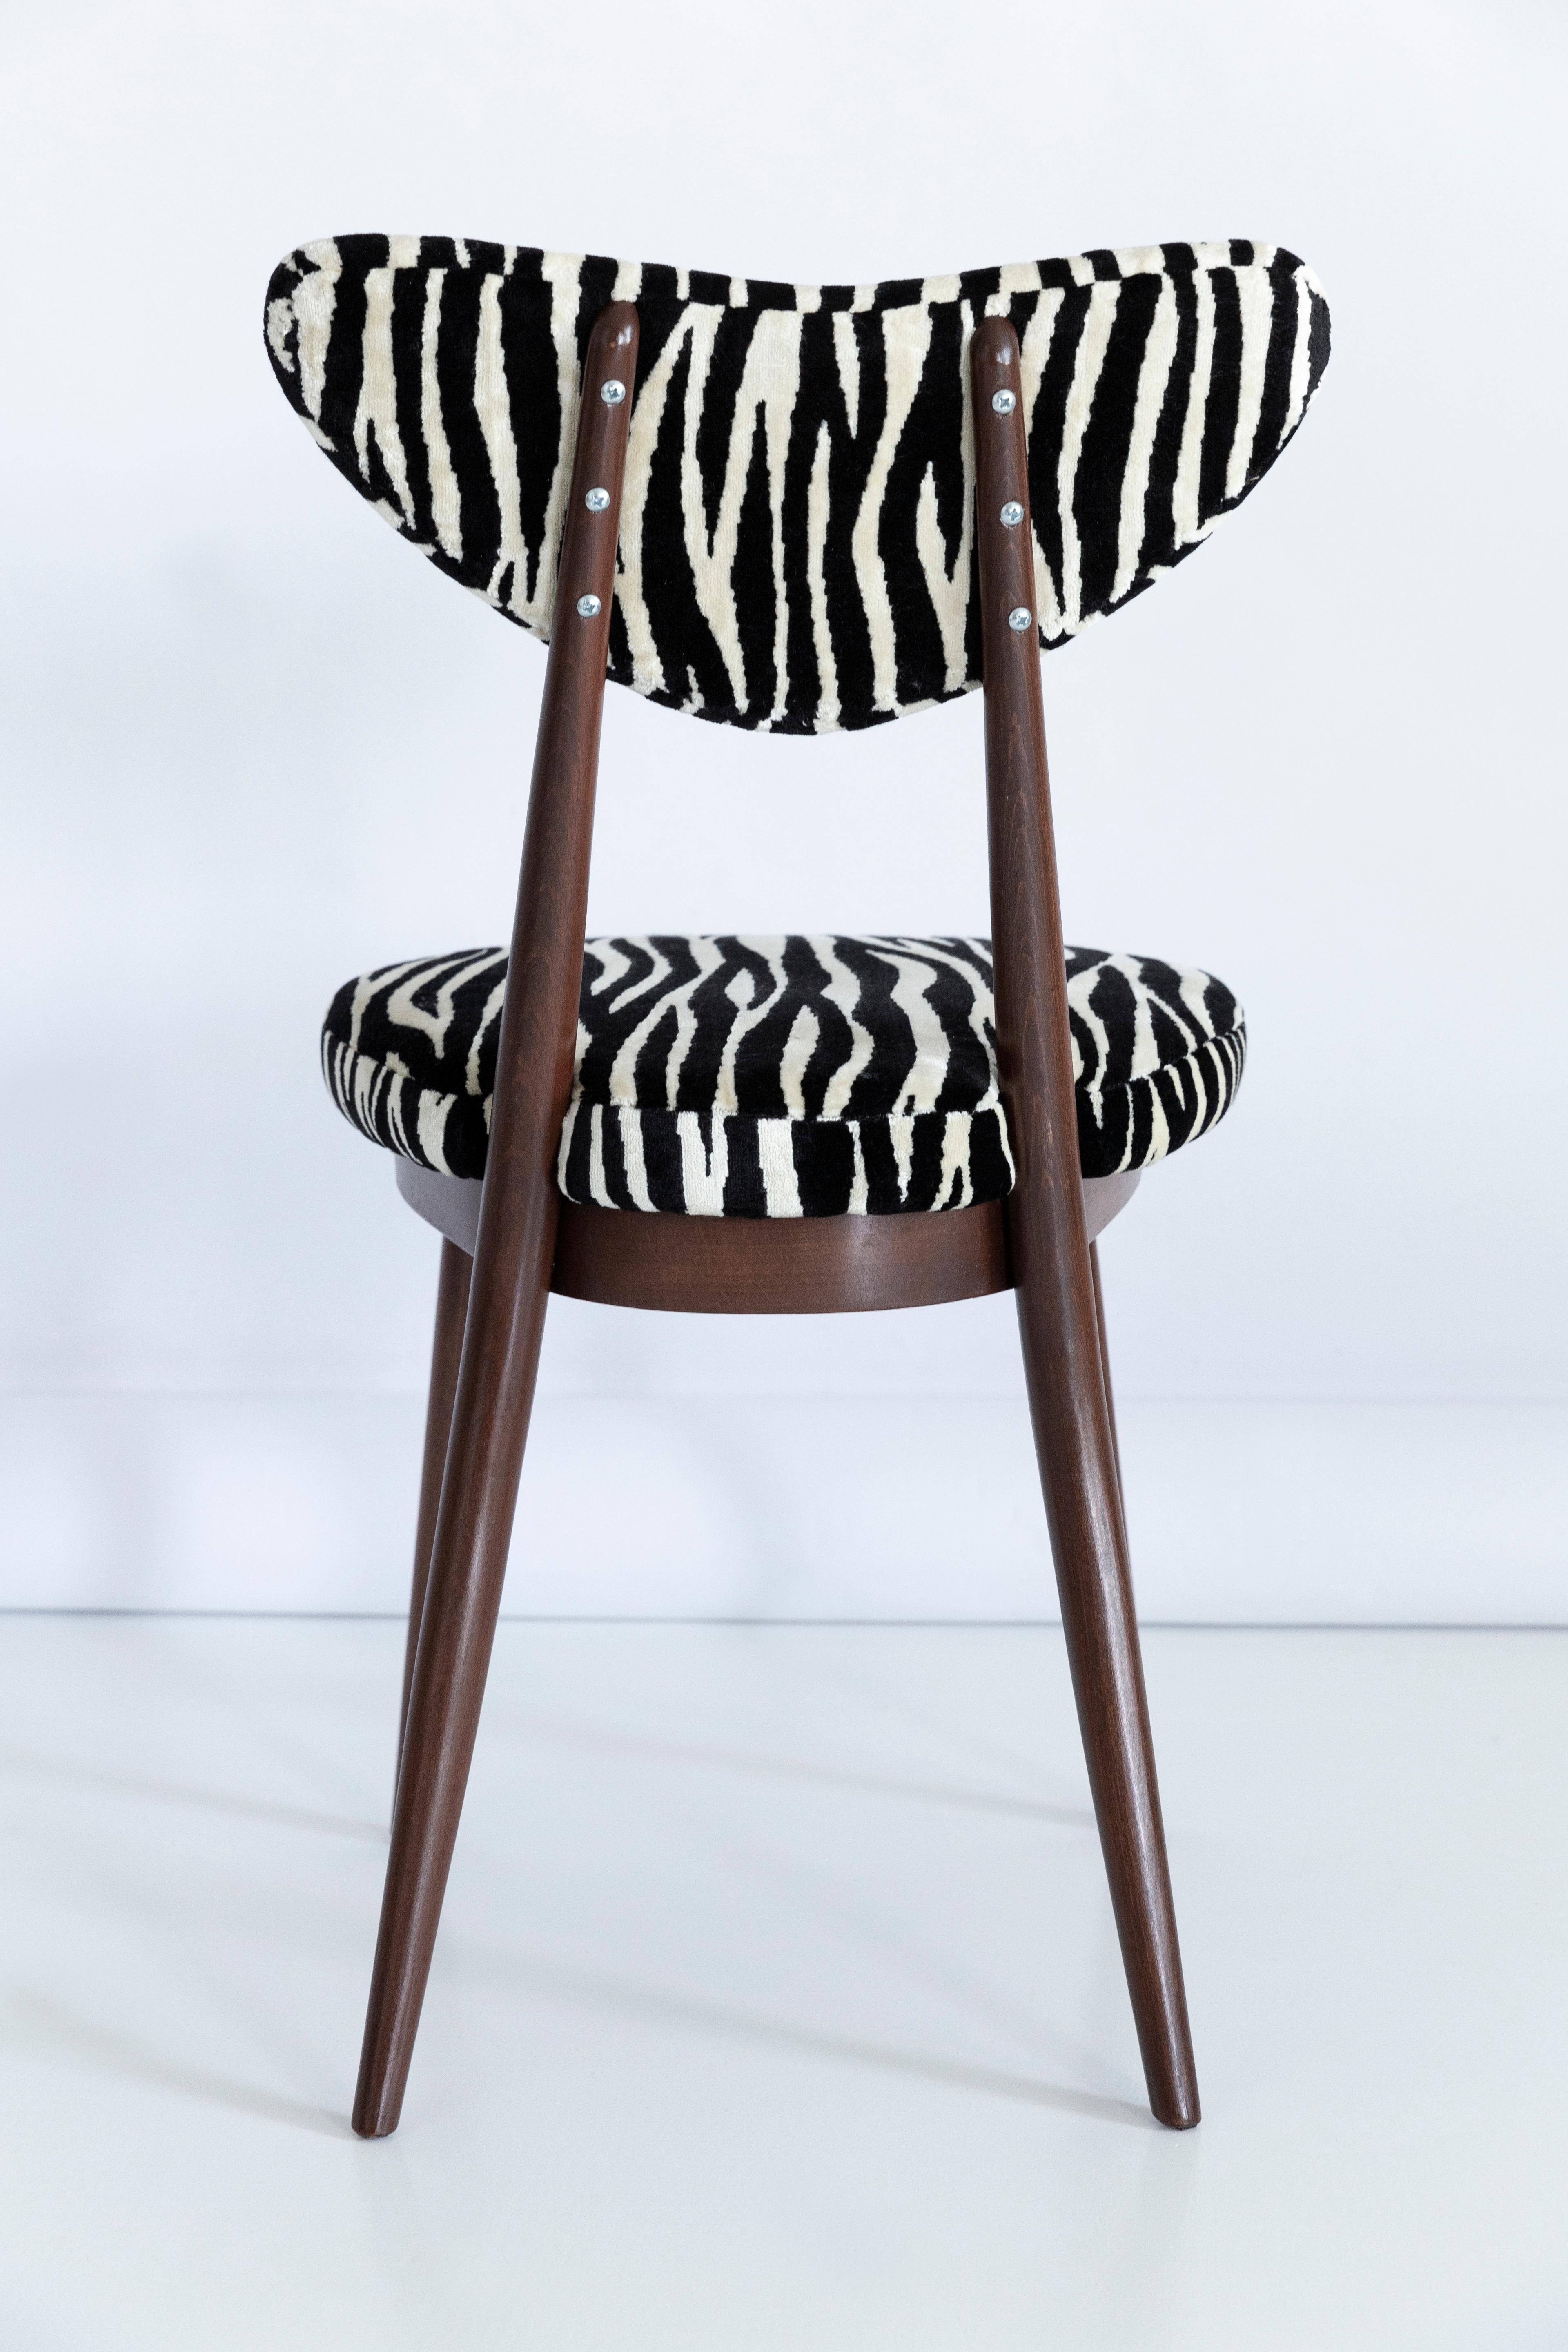 20th Century Set of Four Midcentury Zebra Black and White Heart Chairs, Poland, 1960s For Sale